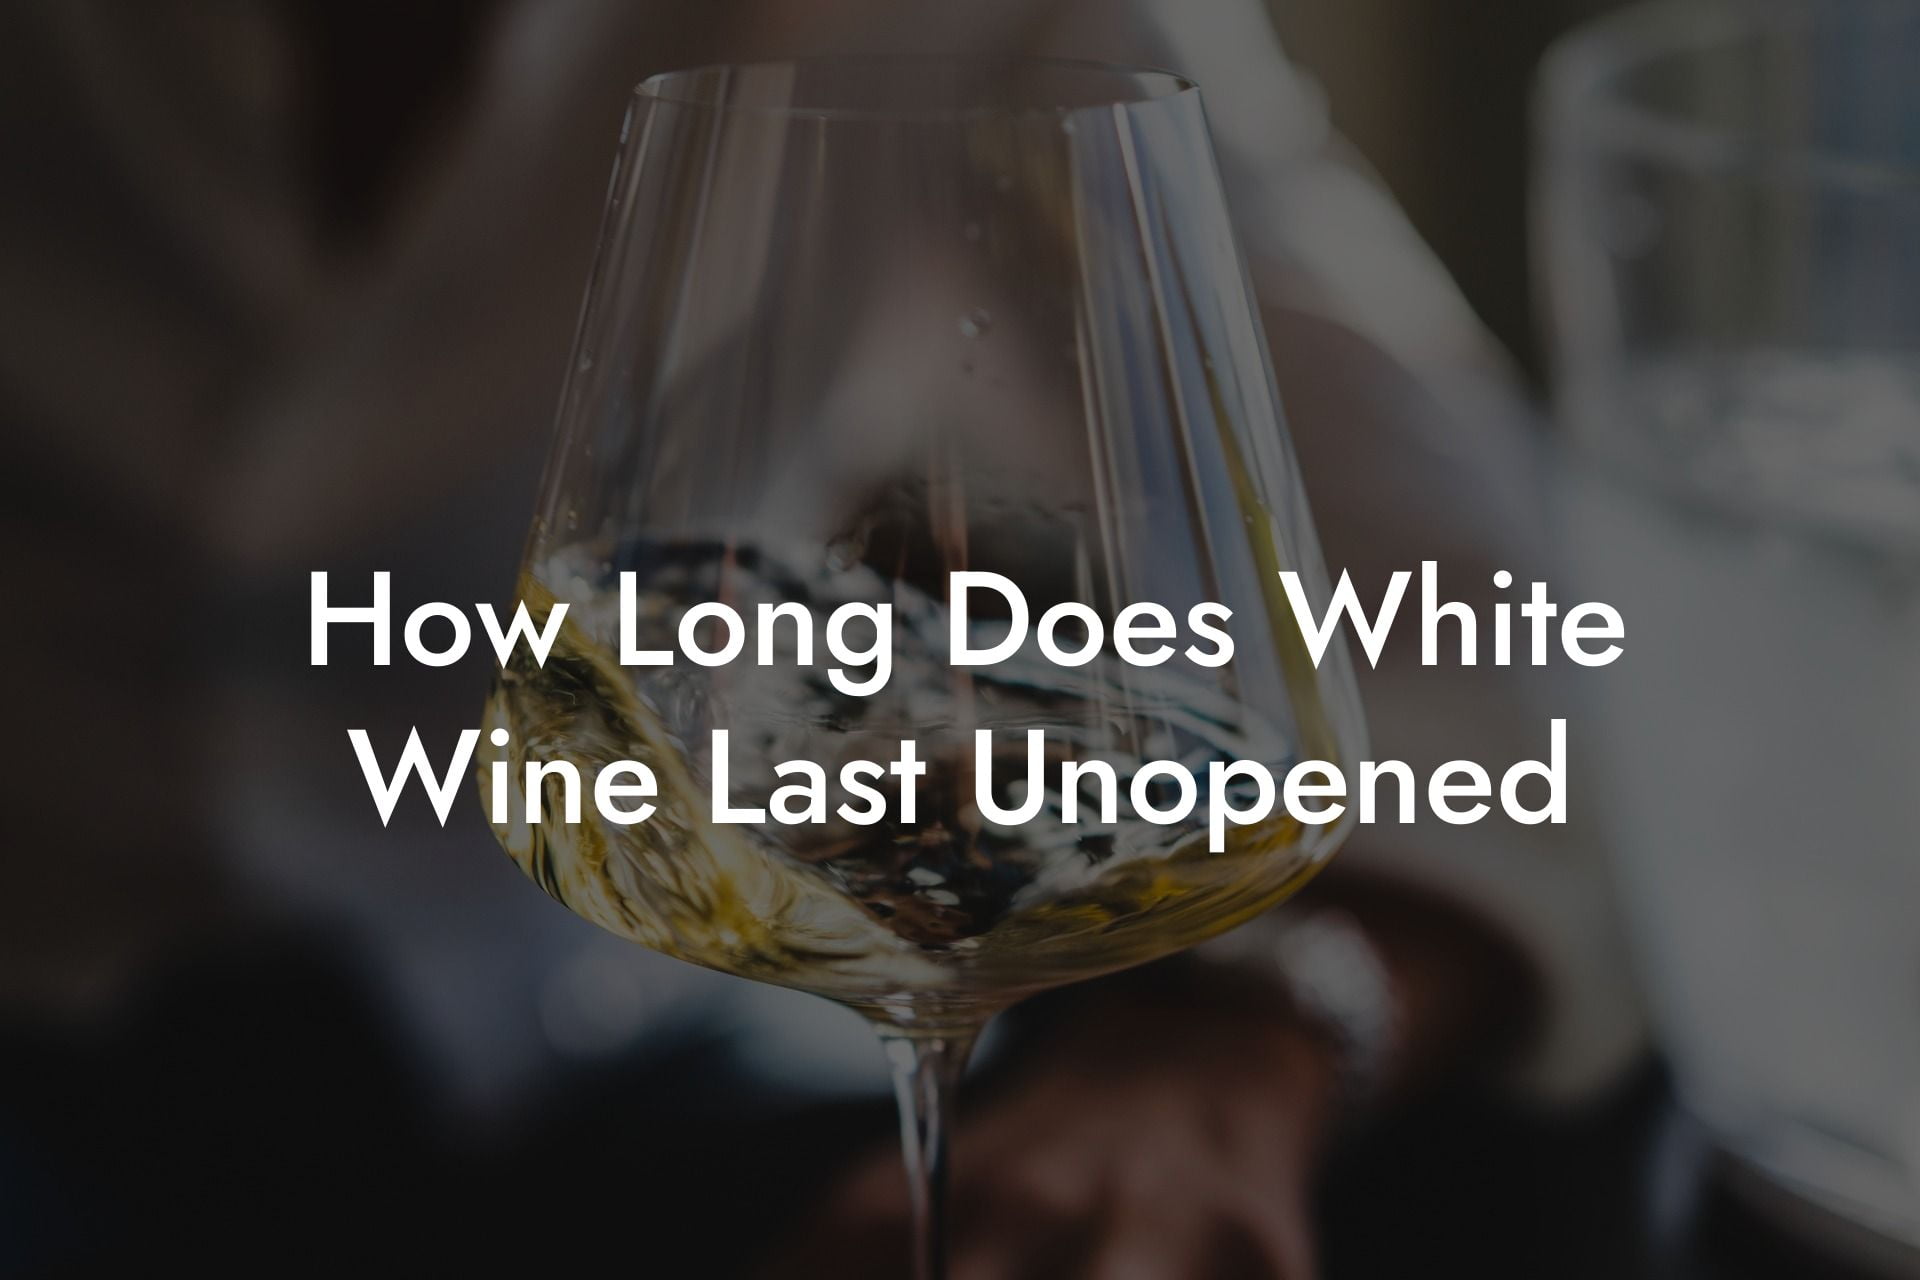 How Long Does White Wine Last Unopened